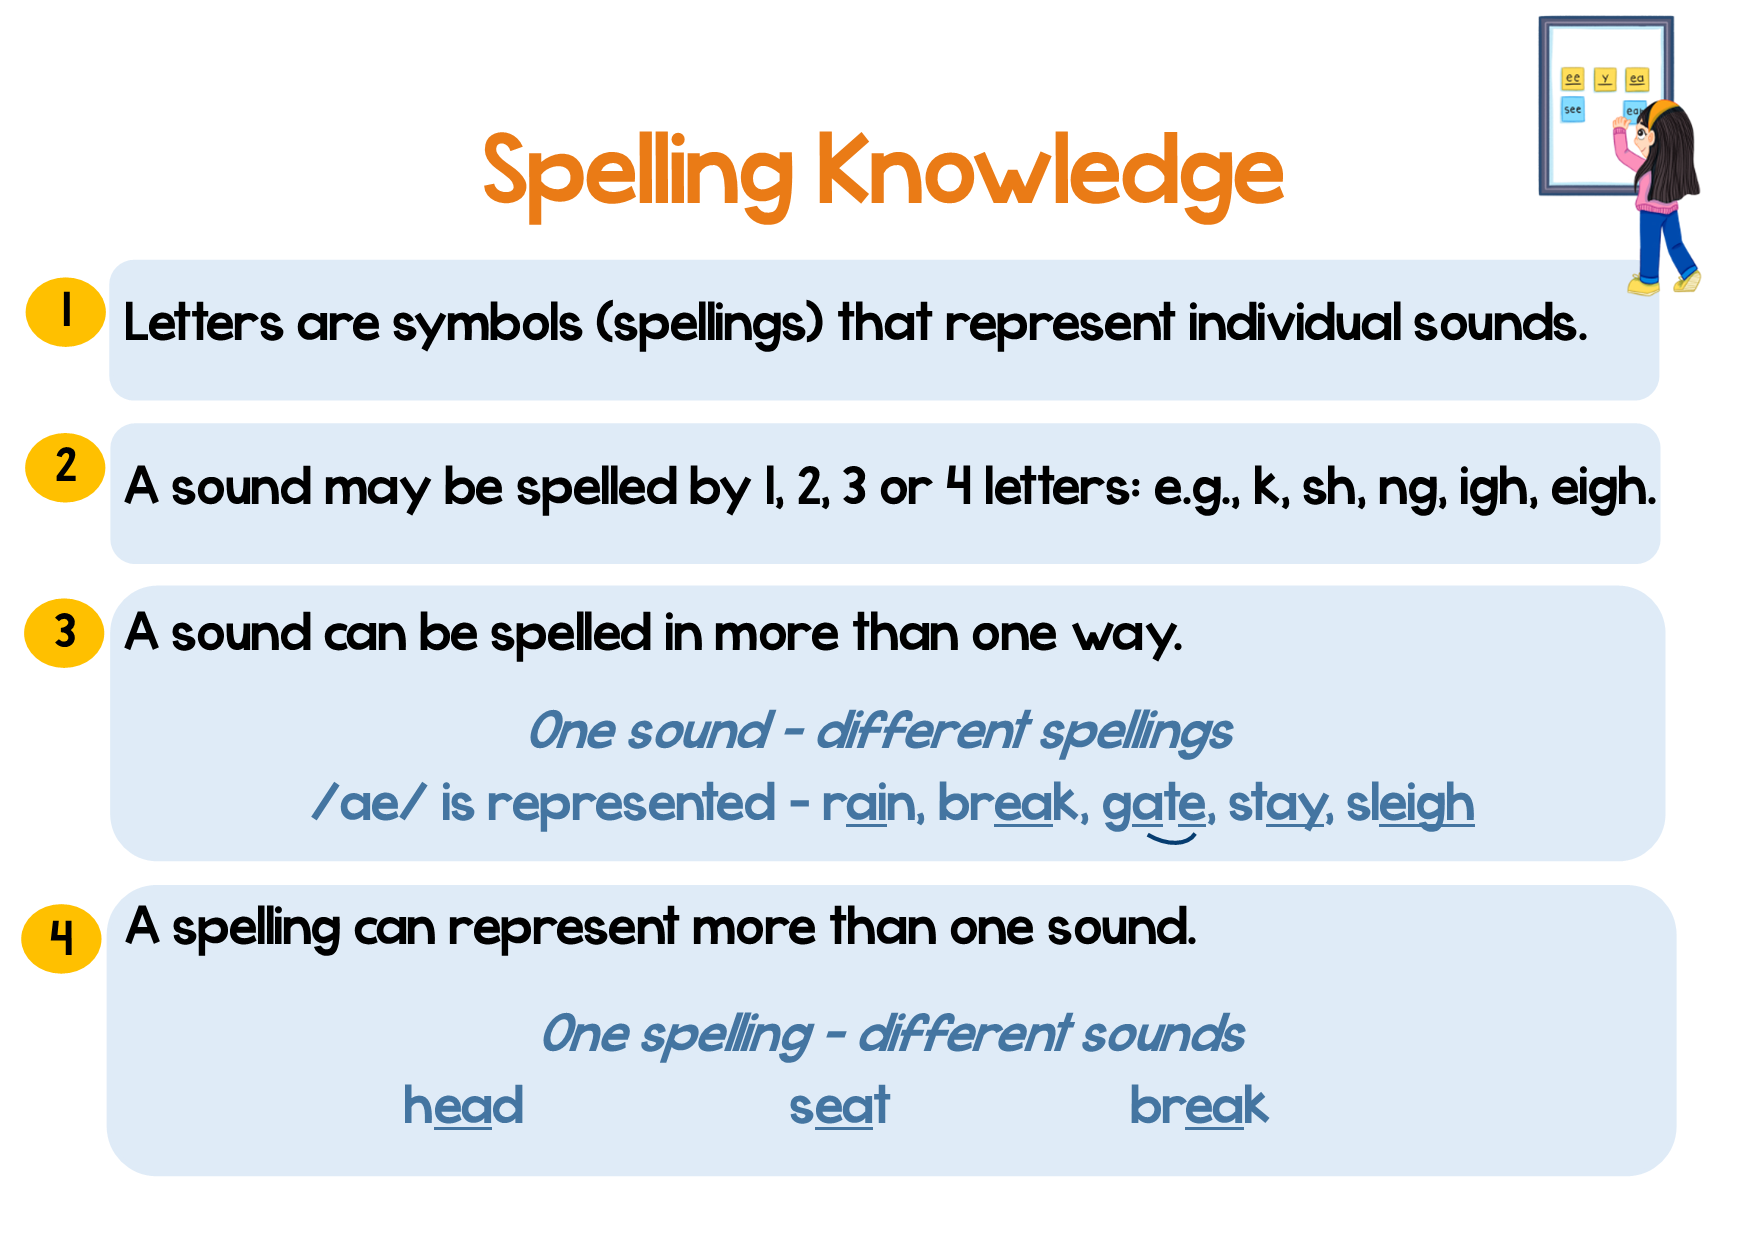 Spelling Knowledge.png